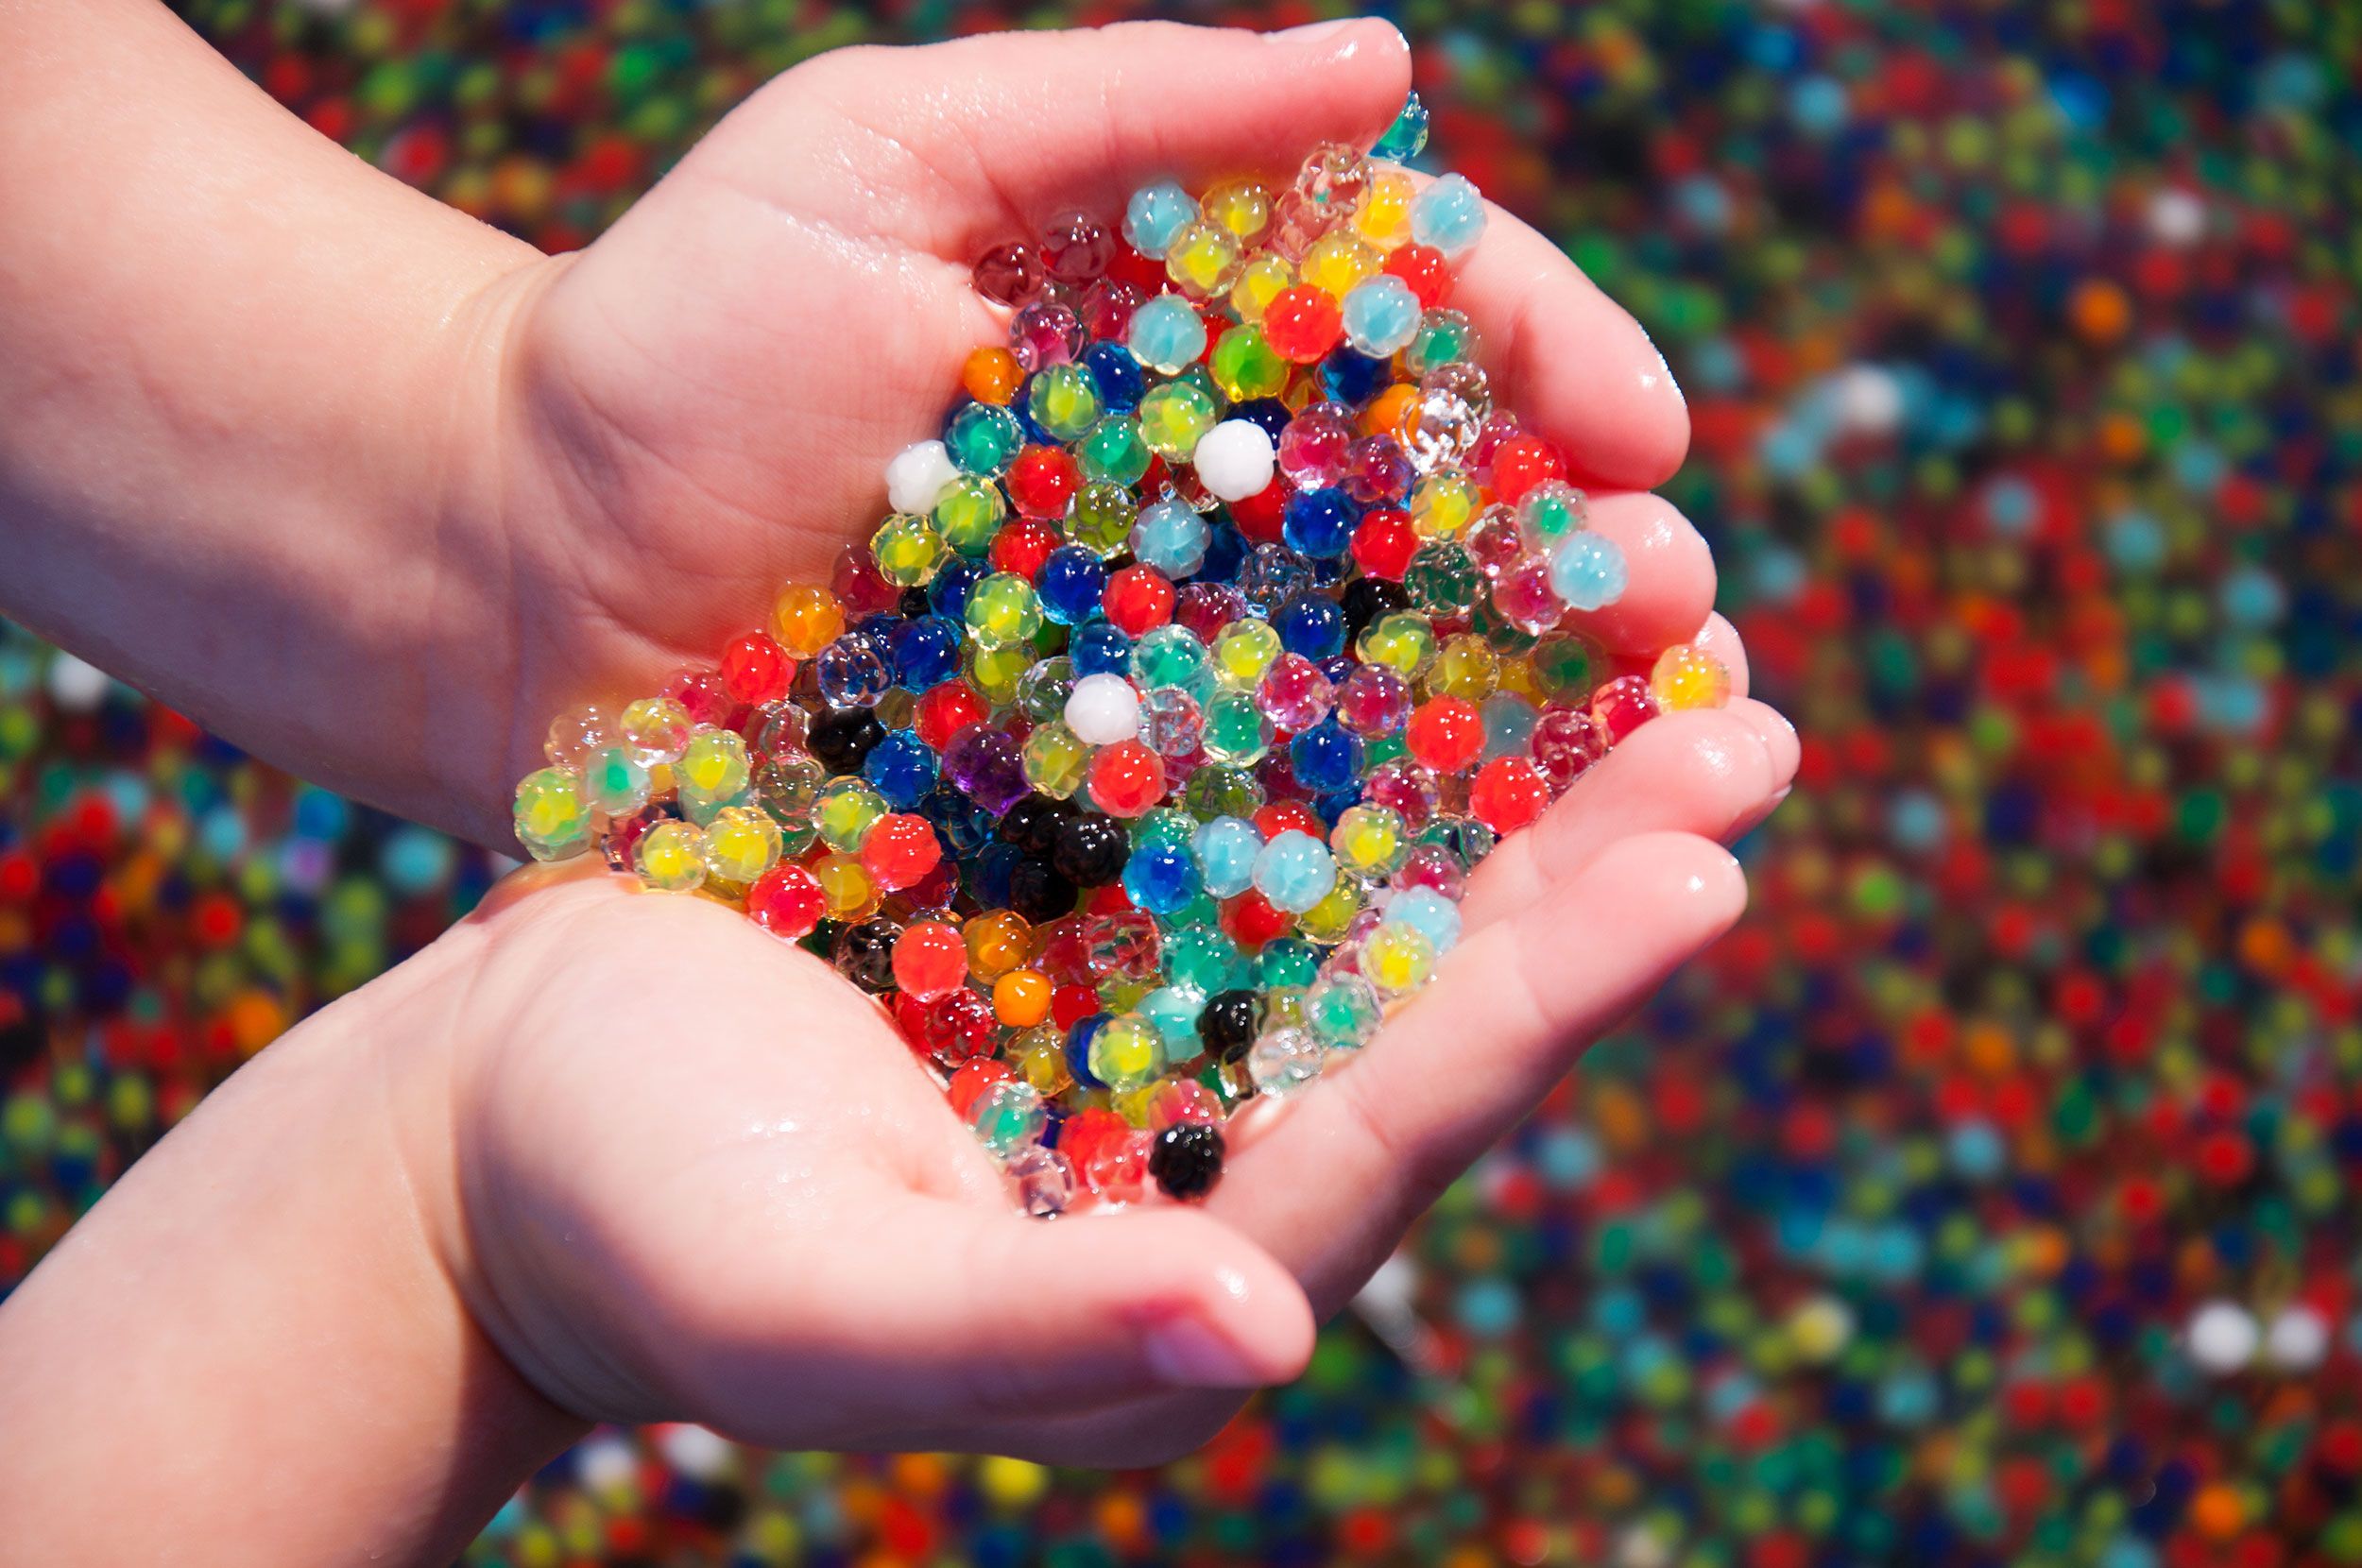 Some retailers stopping sale of water beads